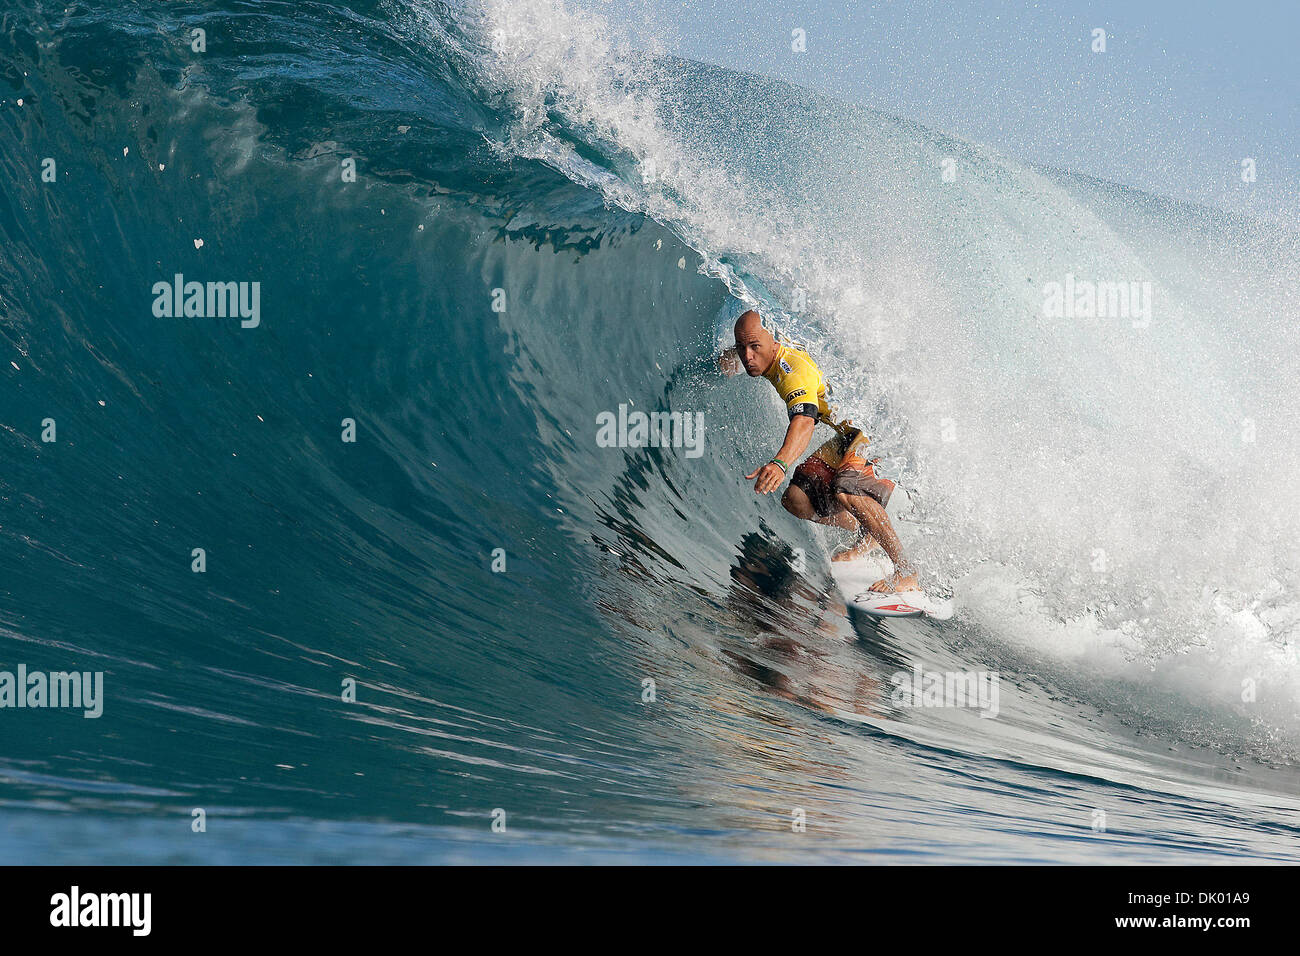 Dec 16, 2010 - Oahu, Hawaii, U.S. - Reigning 10X ASP World Champion KELLY SLATER (Coca Beach, USA) placed second in his Semi Final of the Billabong Pipe Master in Memory of Andy Irons at Backdoor, Hawaii. Slater placed second to eventual event winner Jeremy Flores (FRA) to exit the event in equal third place. Holding the lead with two minutes remaining Slater let a wave go by think Stock Photo